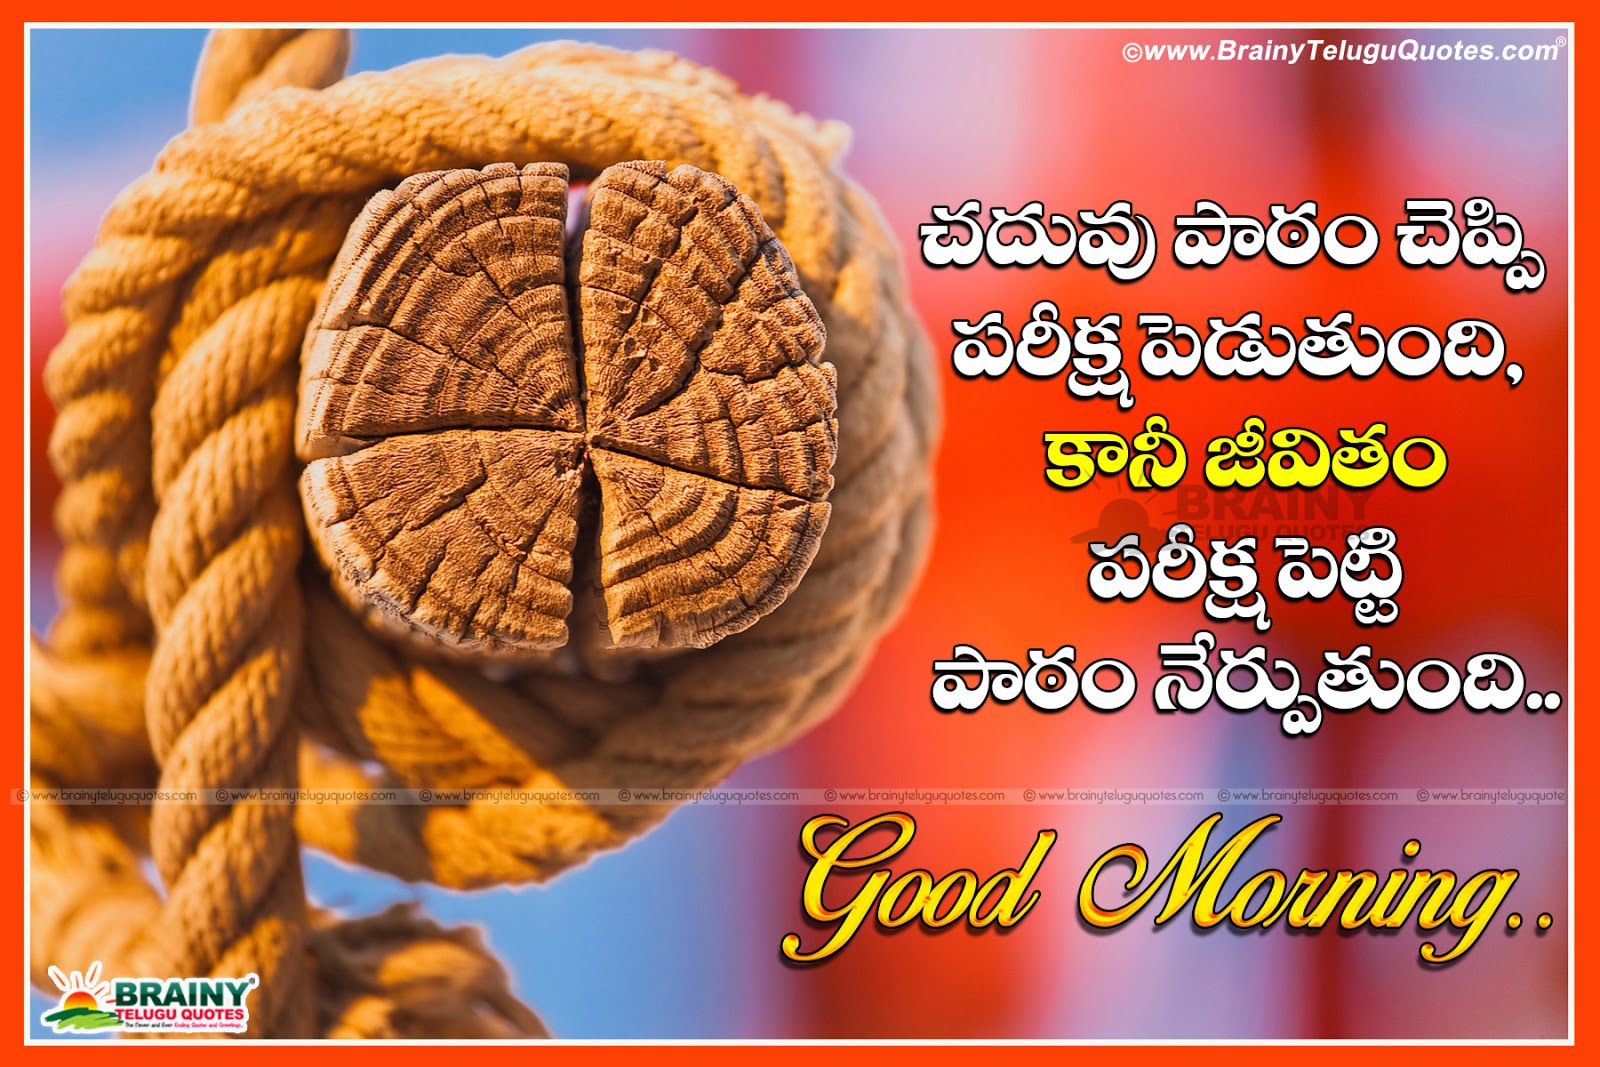 Heart Touching Good Morning Quotes In Telugu Brainyteluguquotes